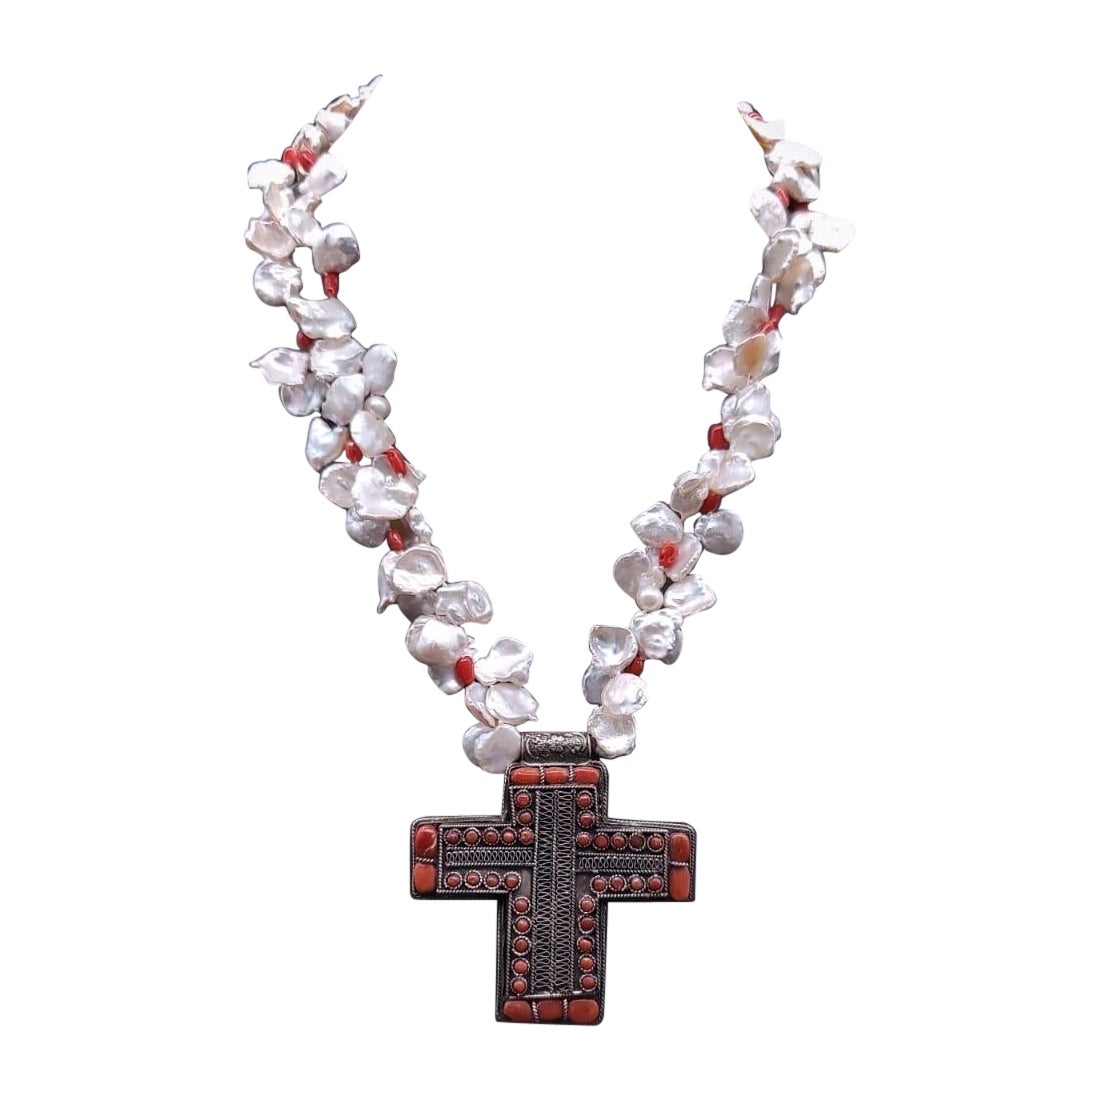 A.Jeschel Stunning Keshi Pearl necklace with silver cross pendant.